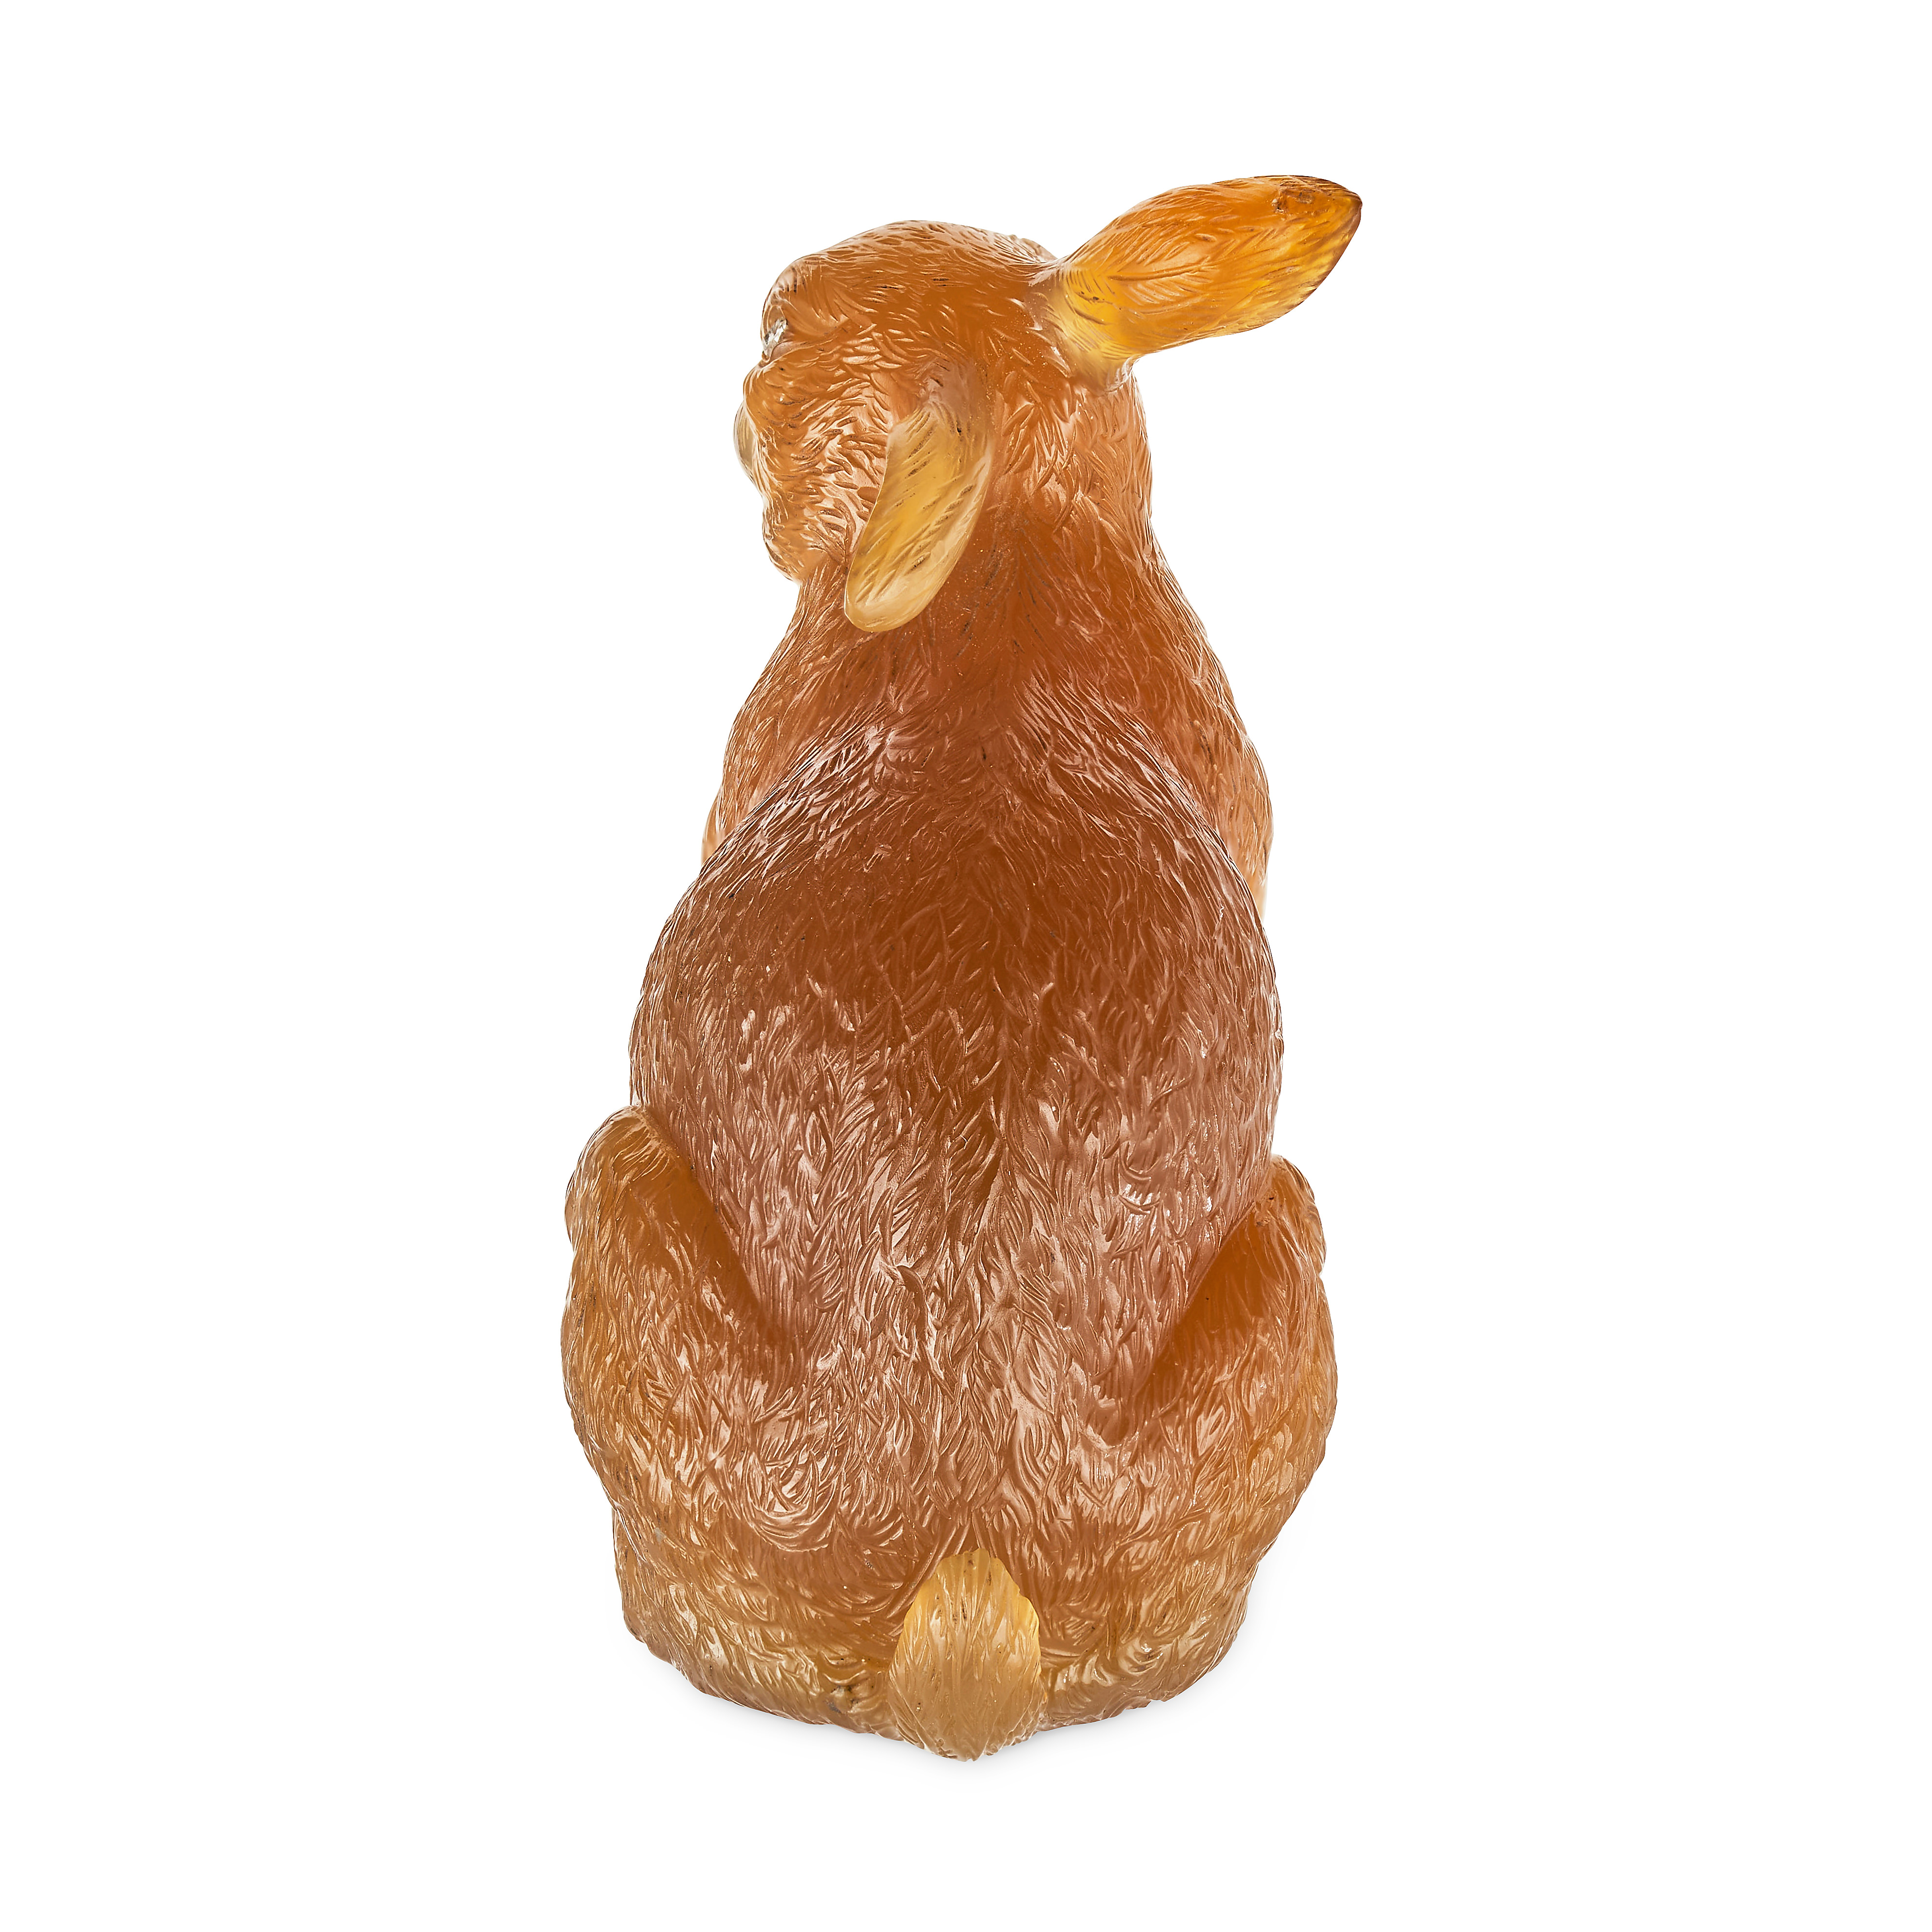 FABERGE, A JEWELLED AGATE FIGURE OF A HARE / LEVERETT, ST PETERSBURG, CIRCA 1900 - Image 4 of 10